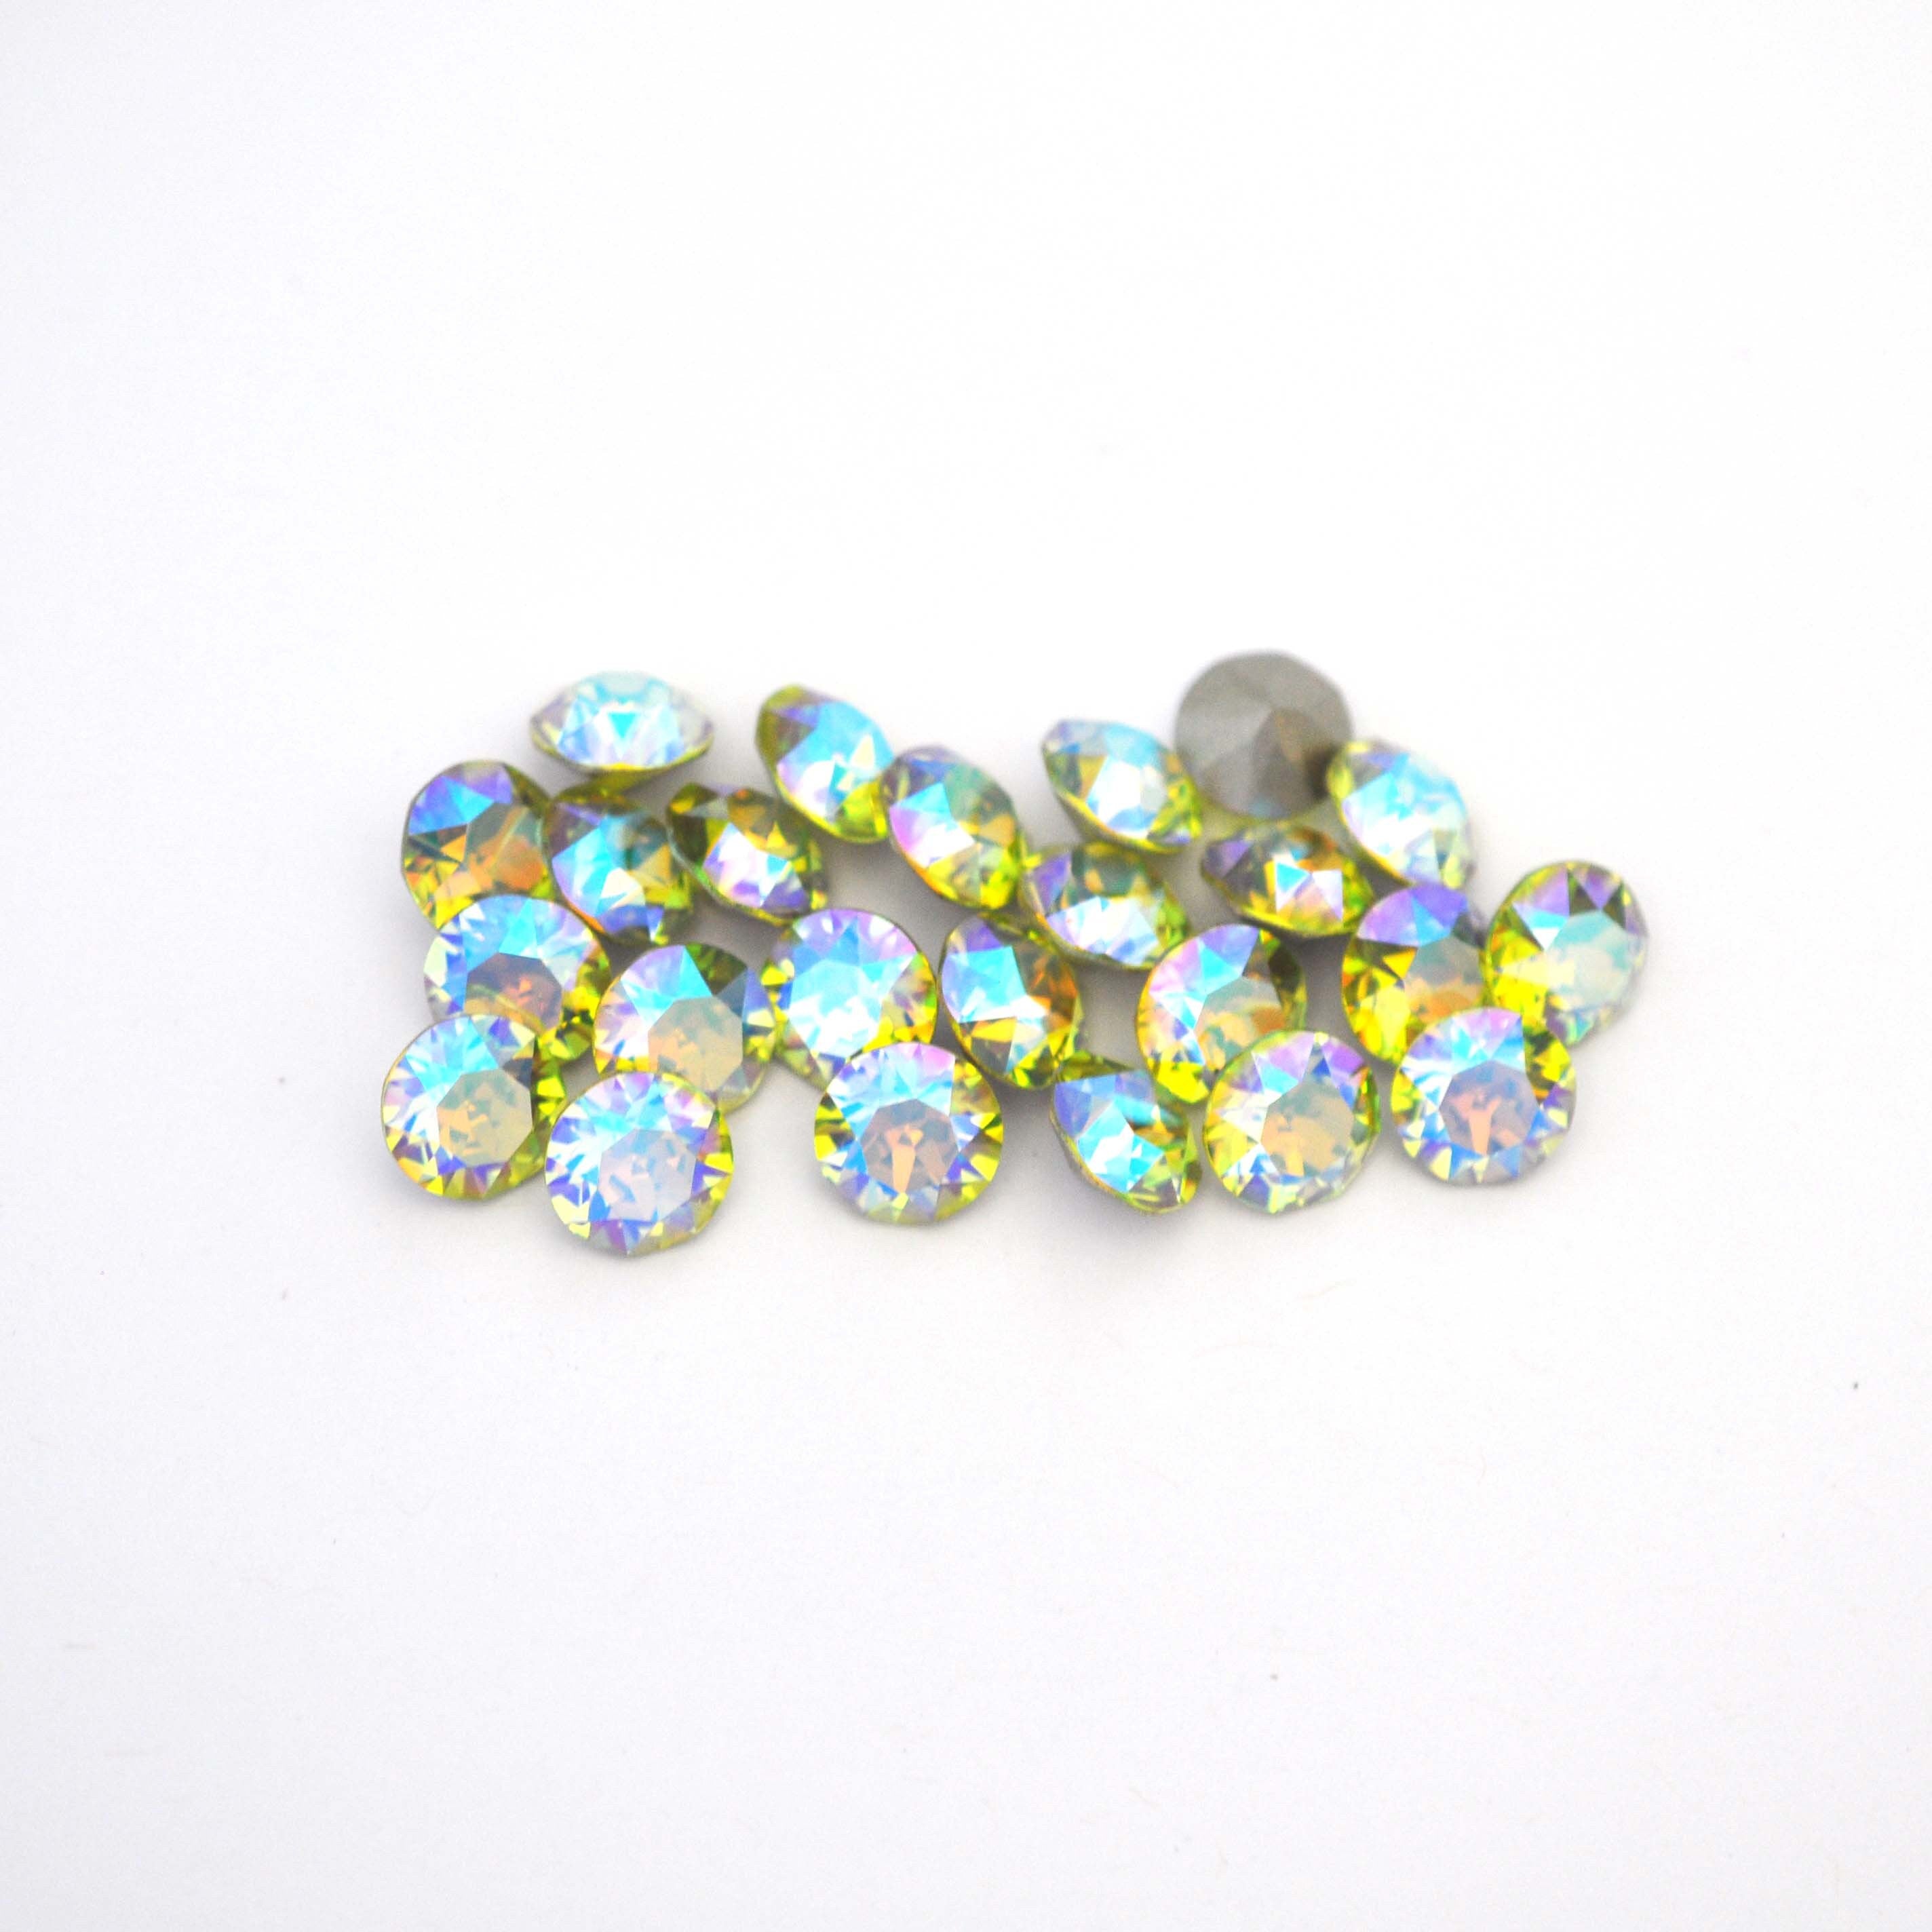 Citrus Green Blue AB 1088 Pointed Back Chaton Barton Crystal 39ss, 8mm